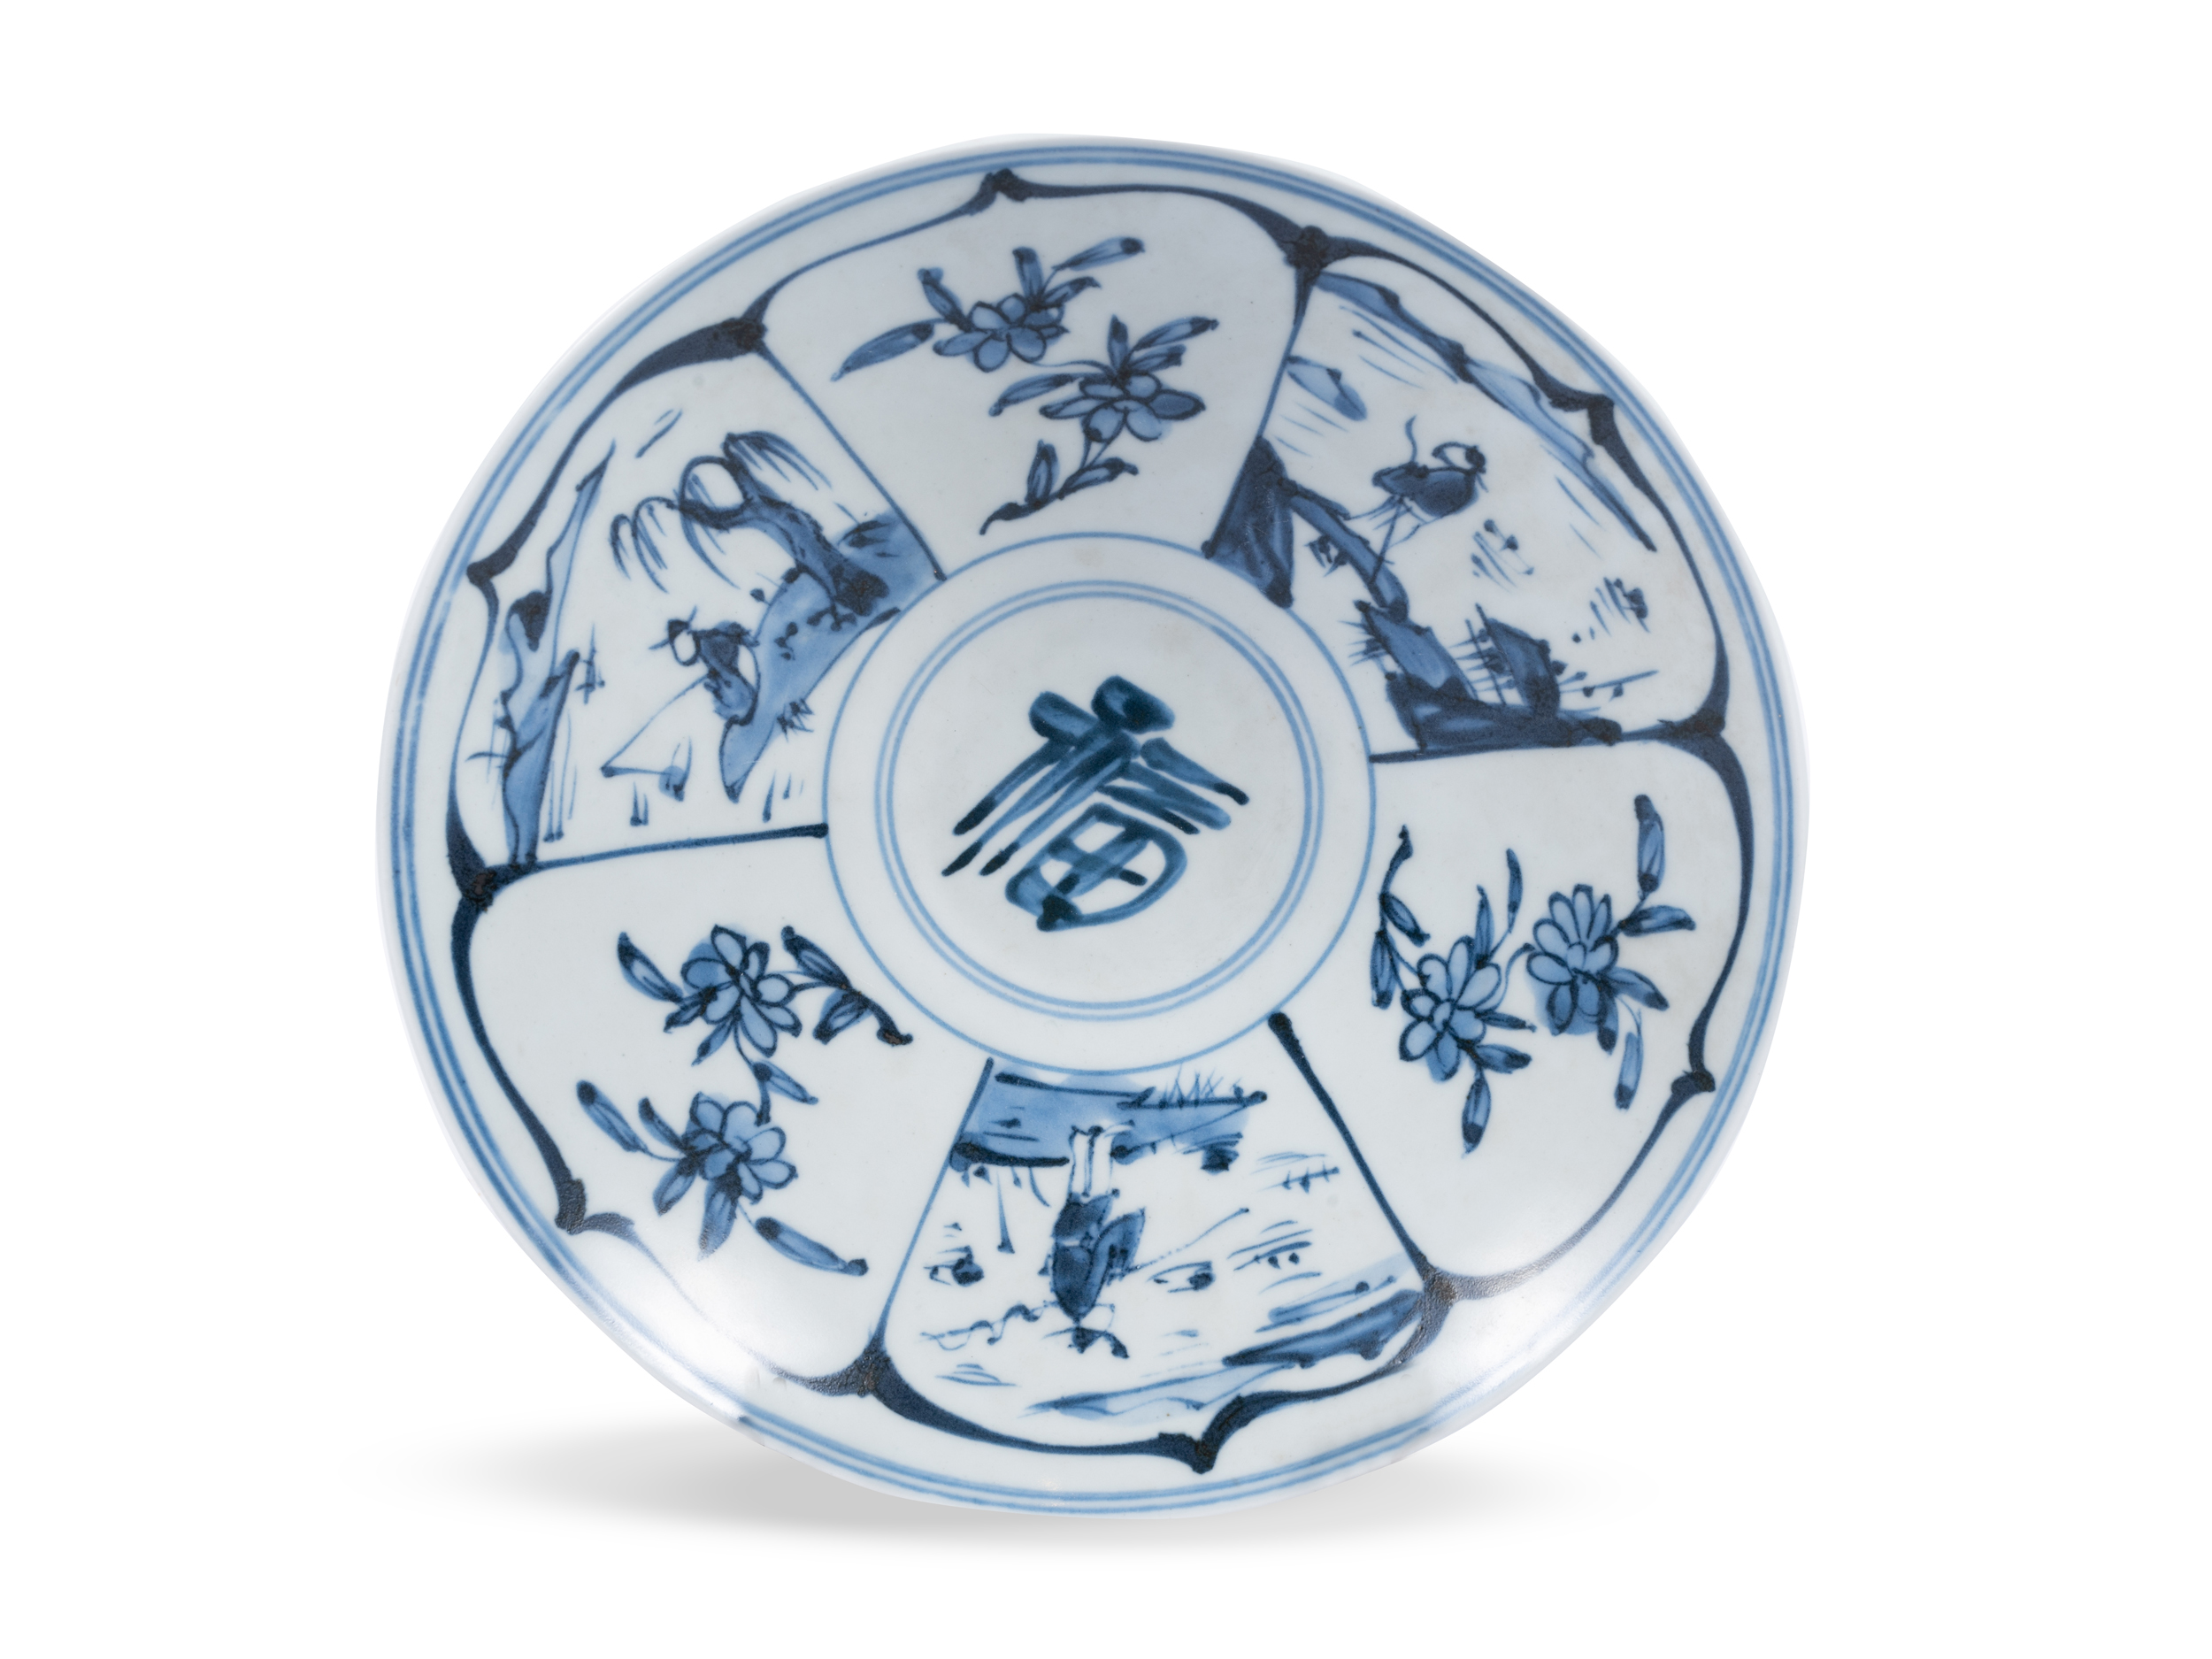 Plate, China, Blue and white porcelain